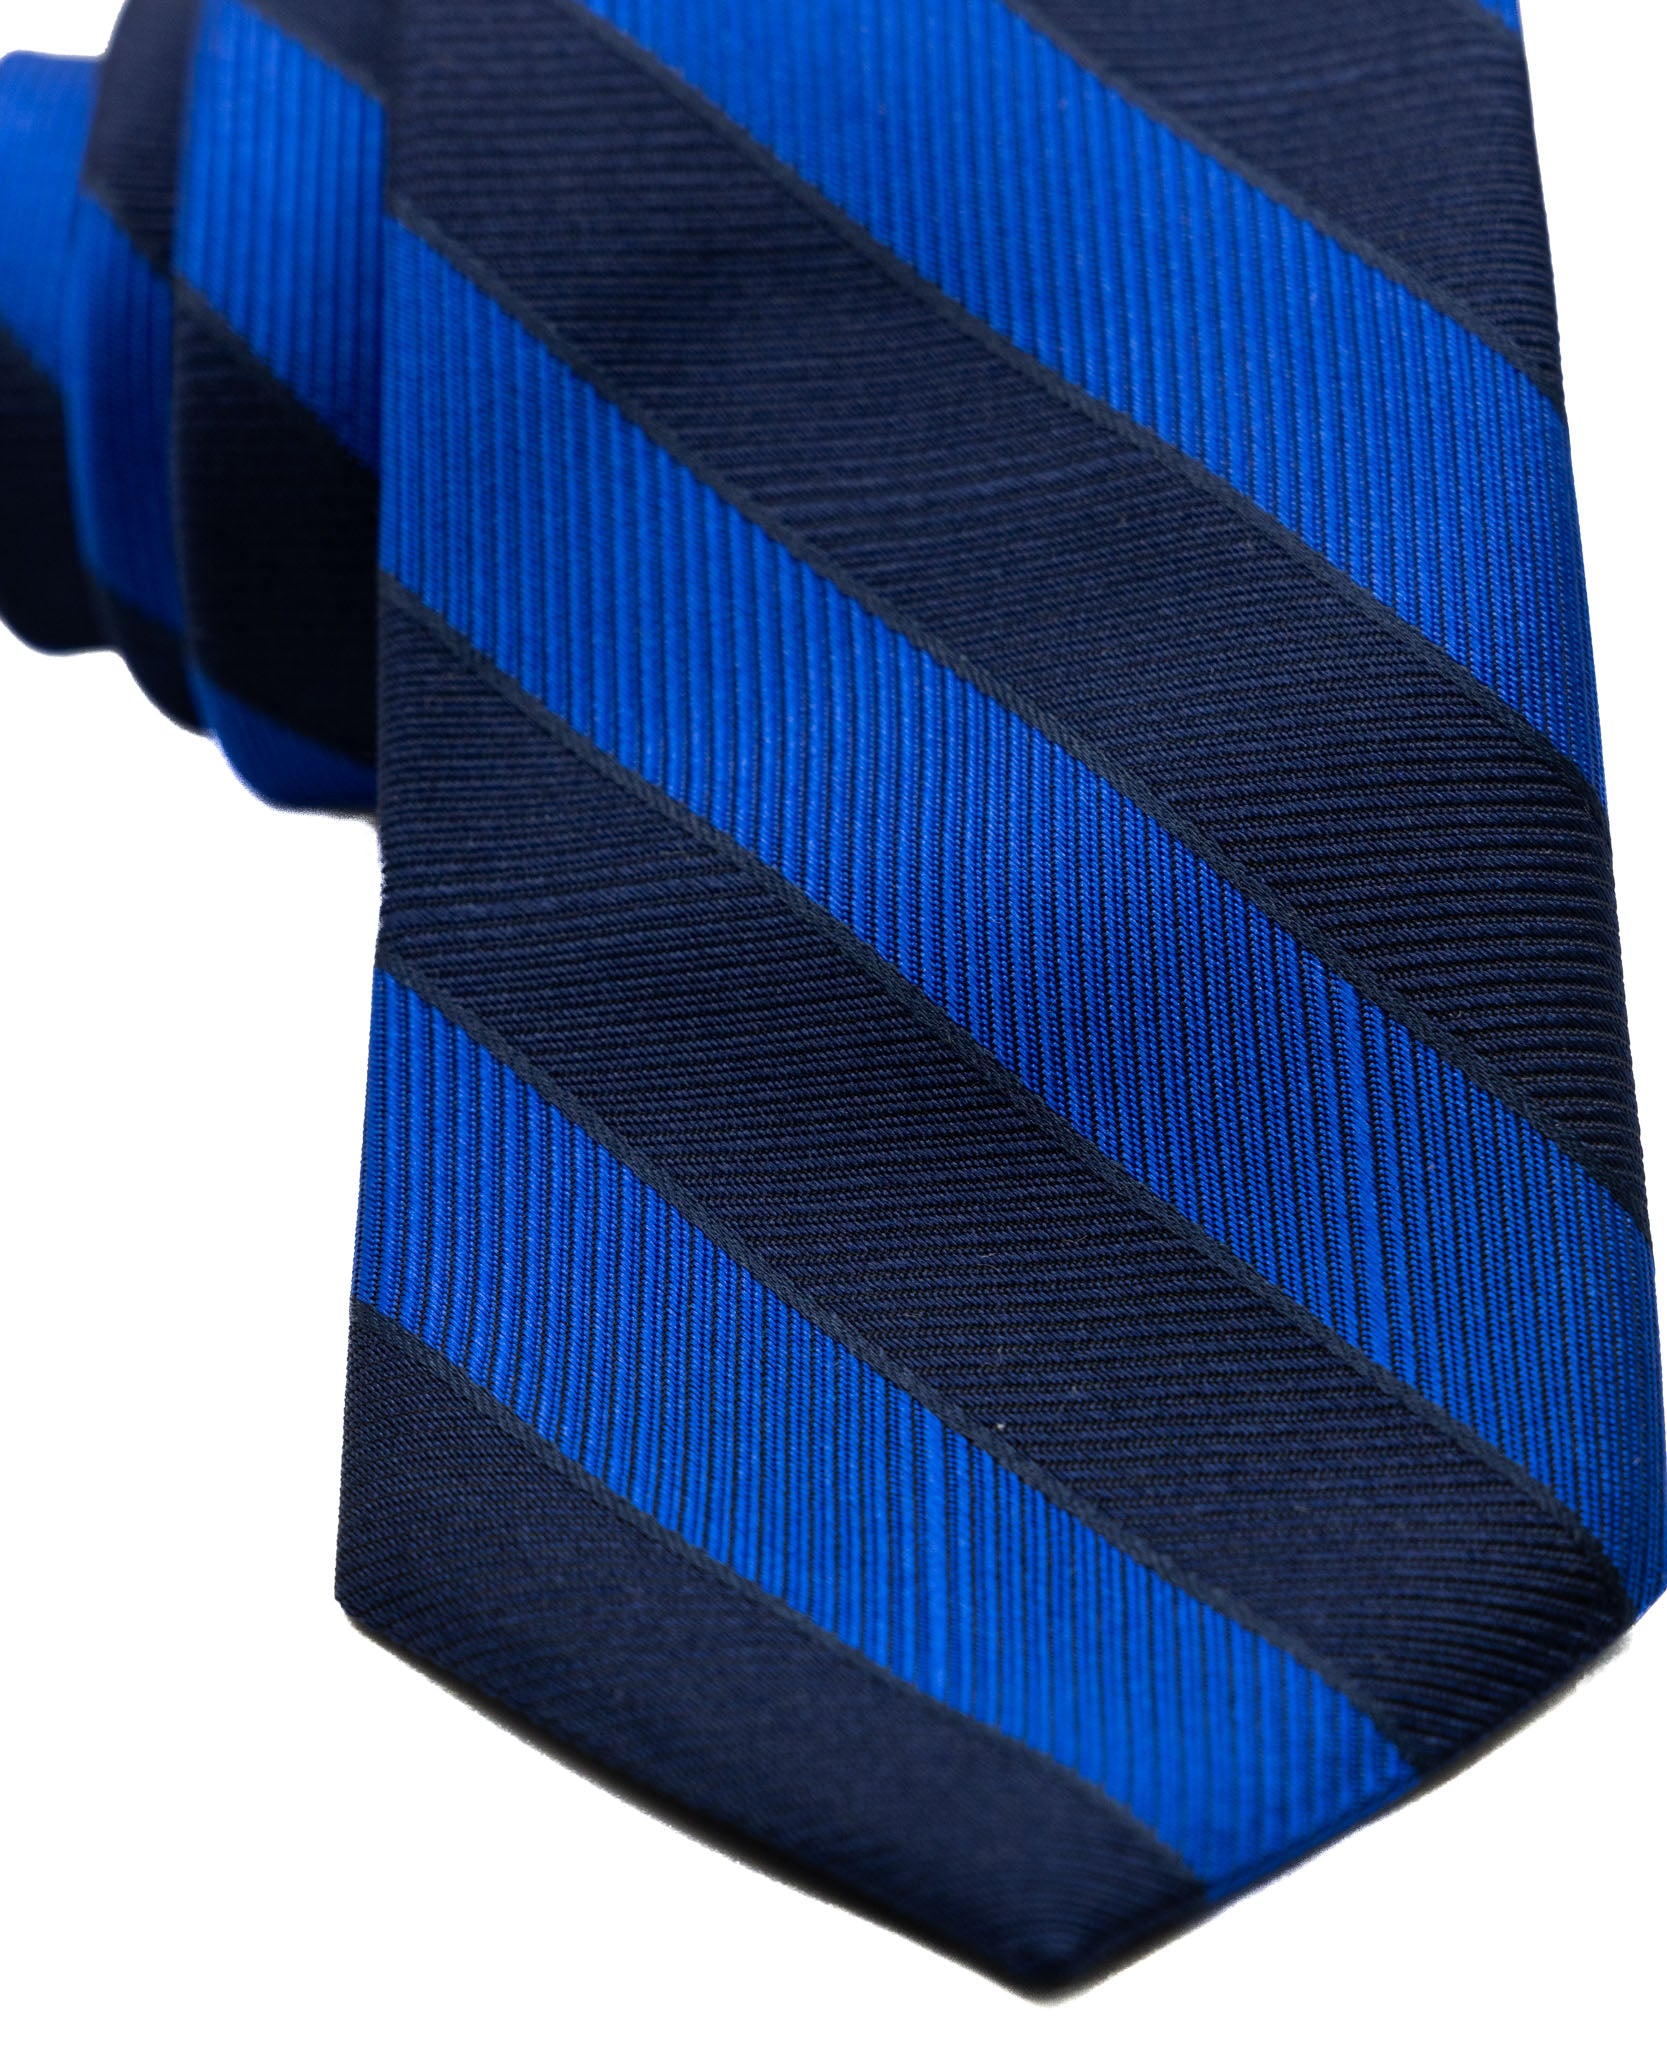 Tie - in silk with blue and royal stripes